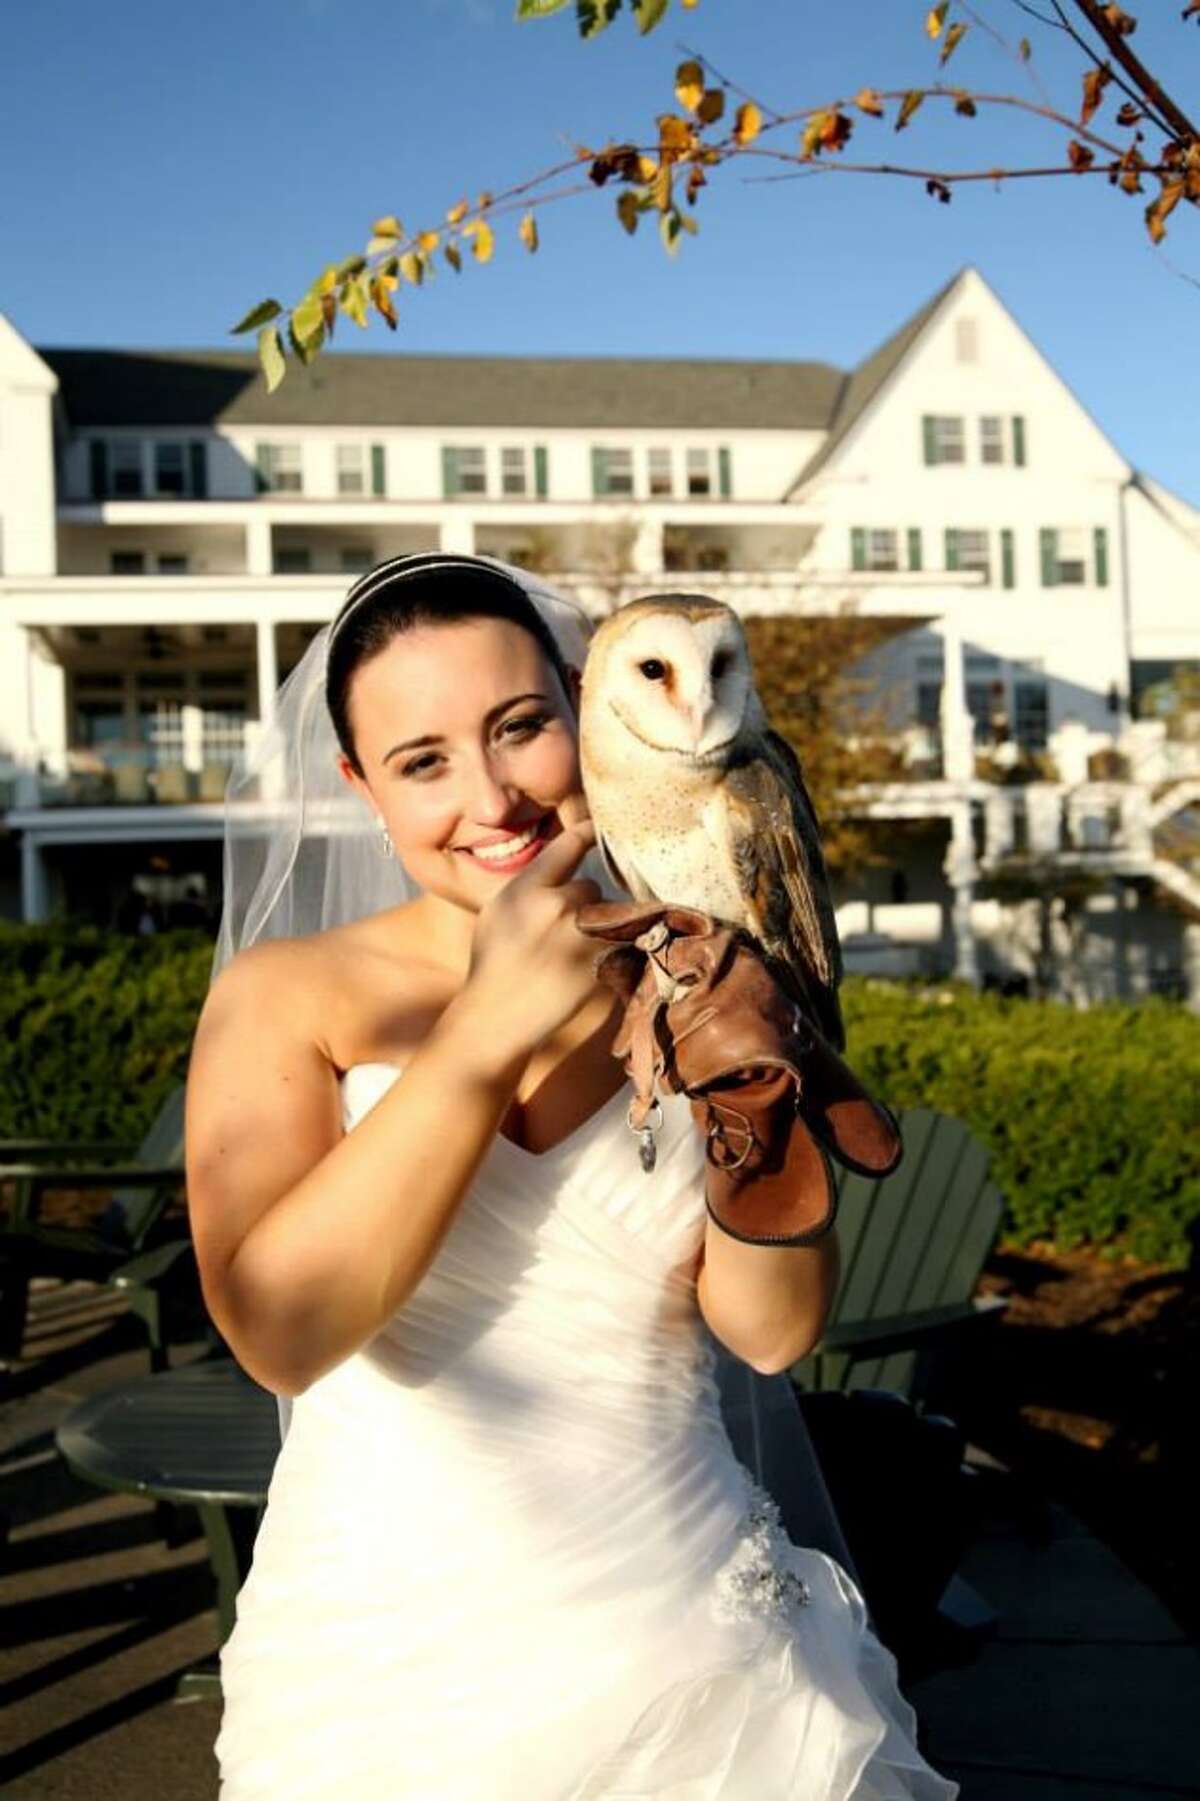 1. My favorite creature on this planet earth is an owl – I even had one fly my wedding rings down the aisle when I got married!  